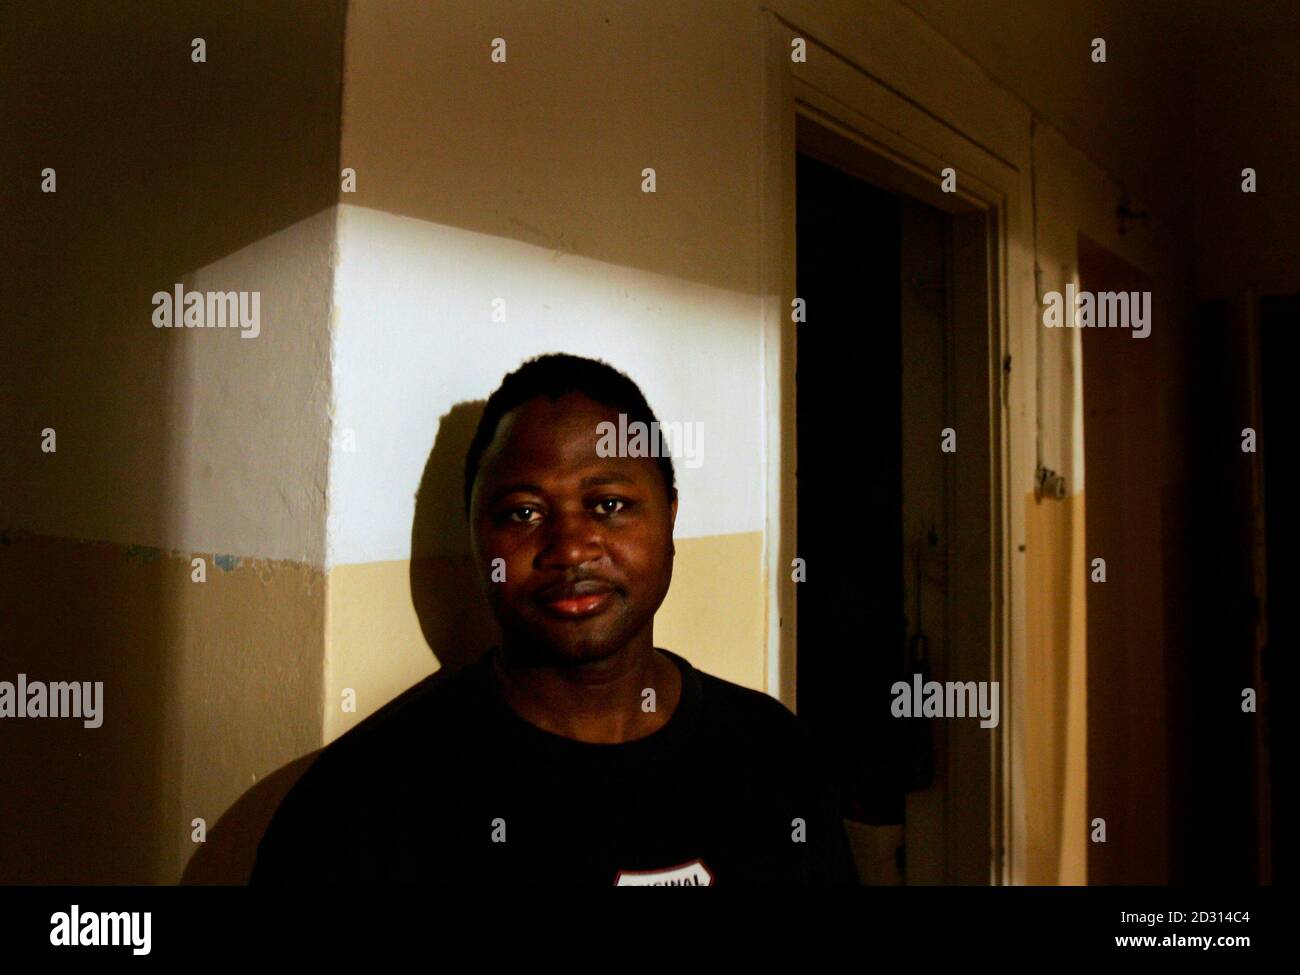 Ayouba Kenneh, a Liberian refugee living in Israel for the past 10 years, stands in his apartment in Tel Aviv March 13, 2007. A group of Liberian refugees given sanctuary in Israel five years ago now face deportation and fear their lives will be in danger if they are repatriated. The United Nations ruled last year that it was safe for refugees to return home, but many, traumatised by the deaths of family members there, are still fearful. Israel granted temporary protection in 2002 to a group of Liberians, who now number 86, including 16 children born in Israel. Their protected status expires o Stock Photo